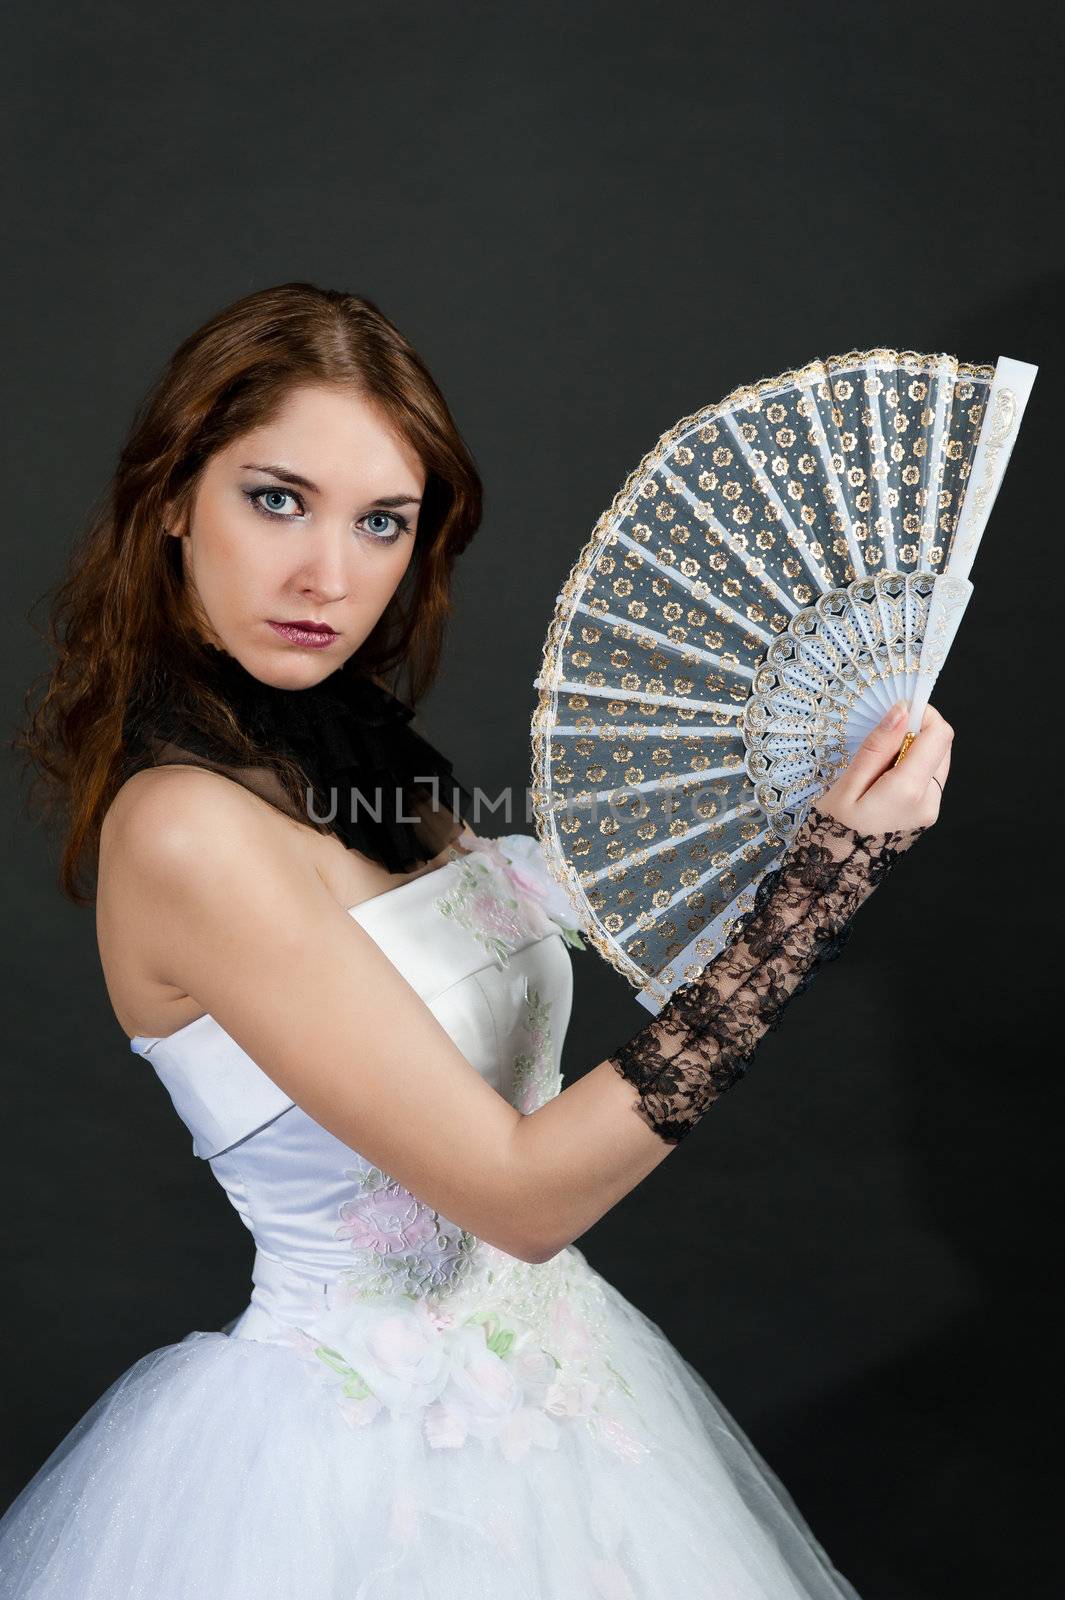 Girl with fan in white dress on black background